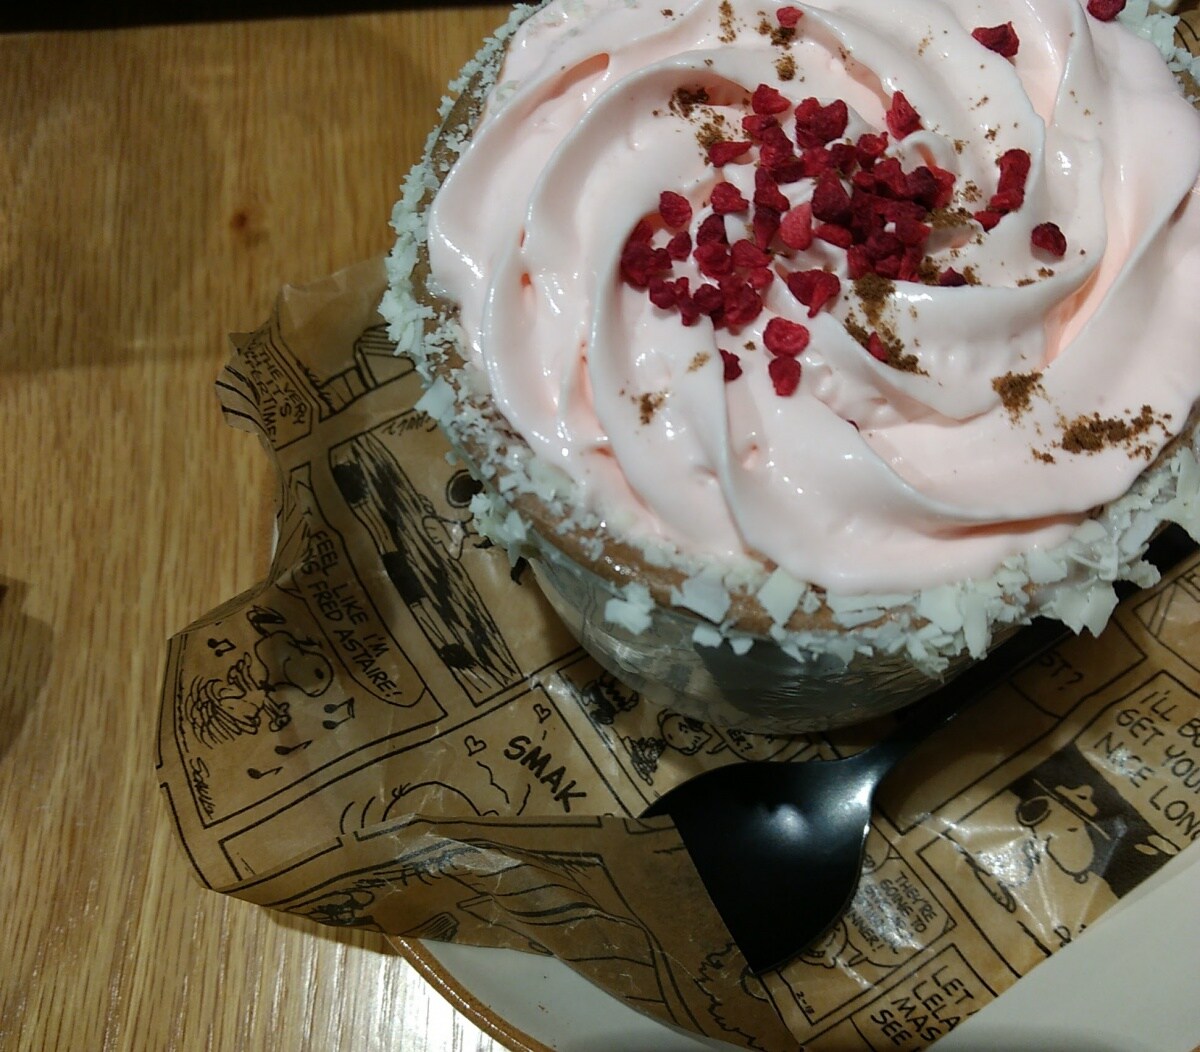 5. Top Dessert Drink: Spiced Chocolate at Peanuts Cafe (Nakameguro)